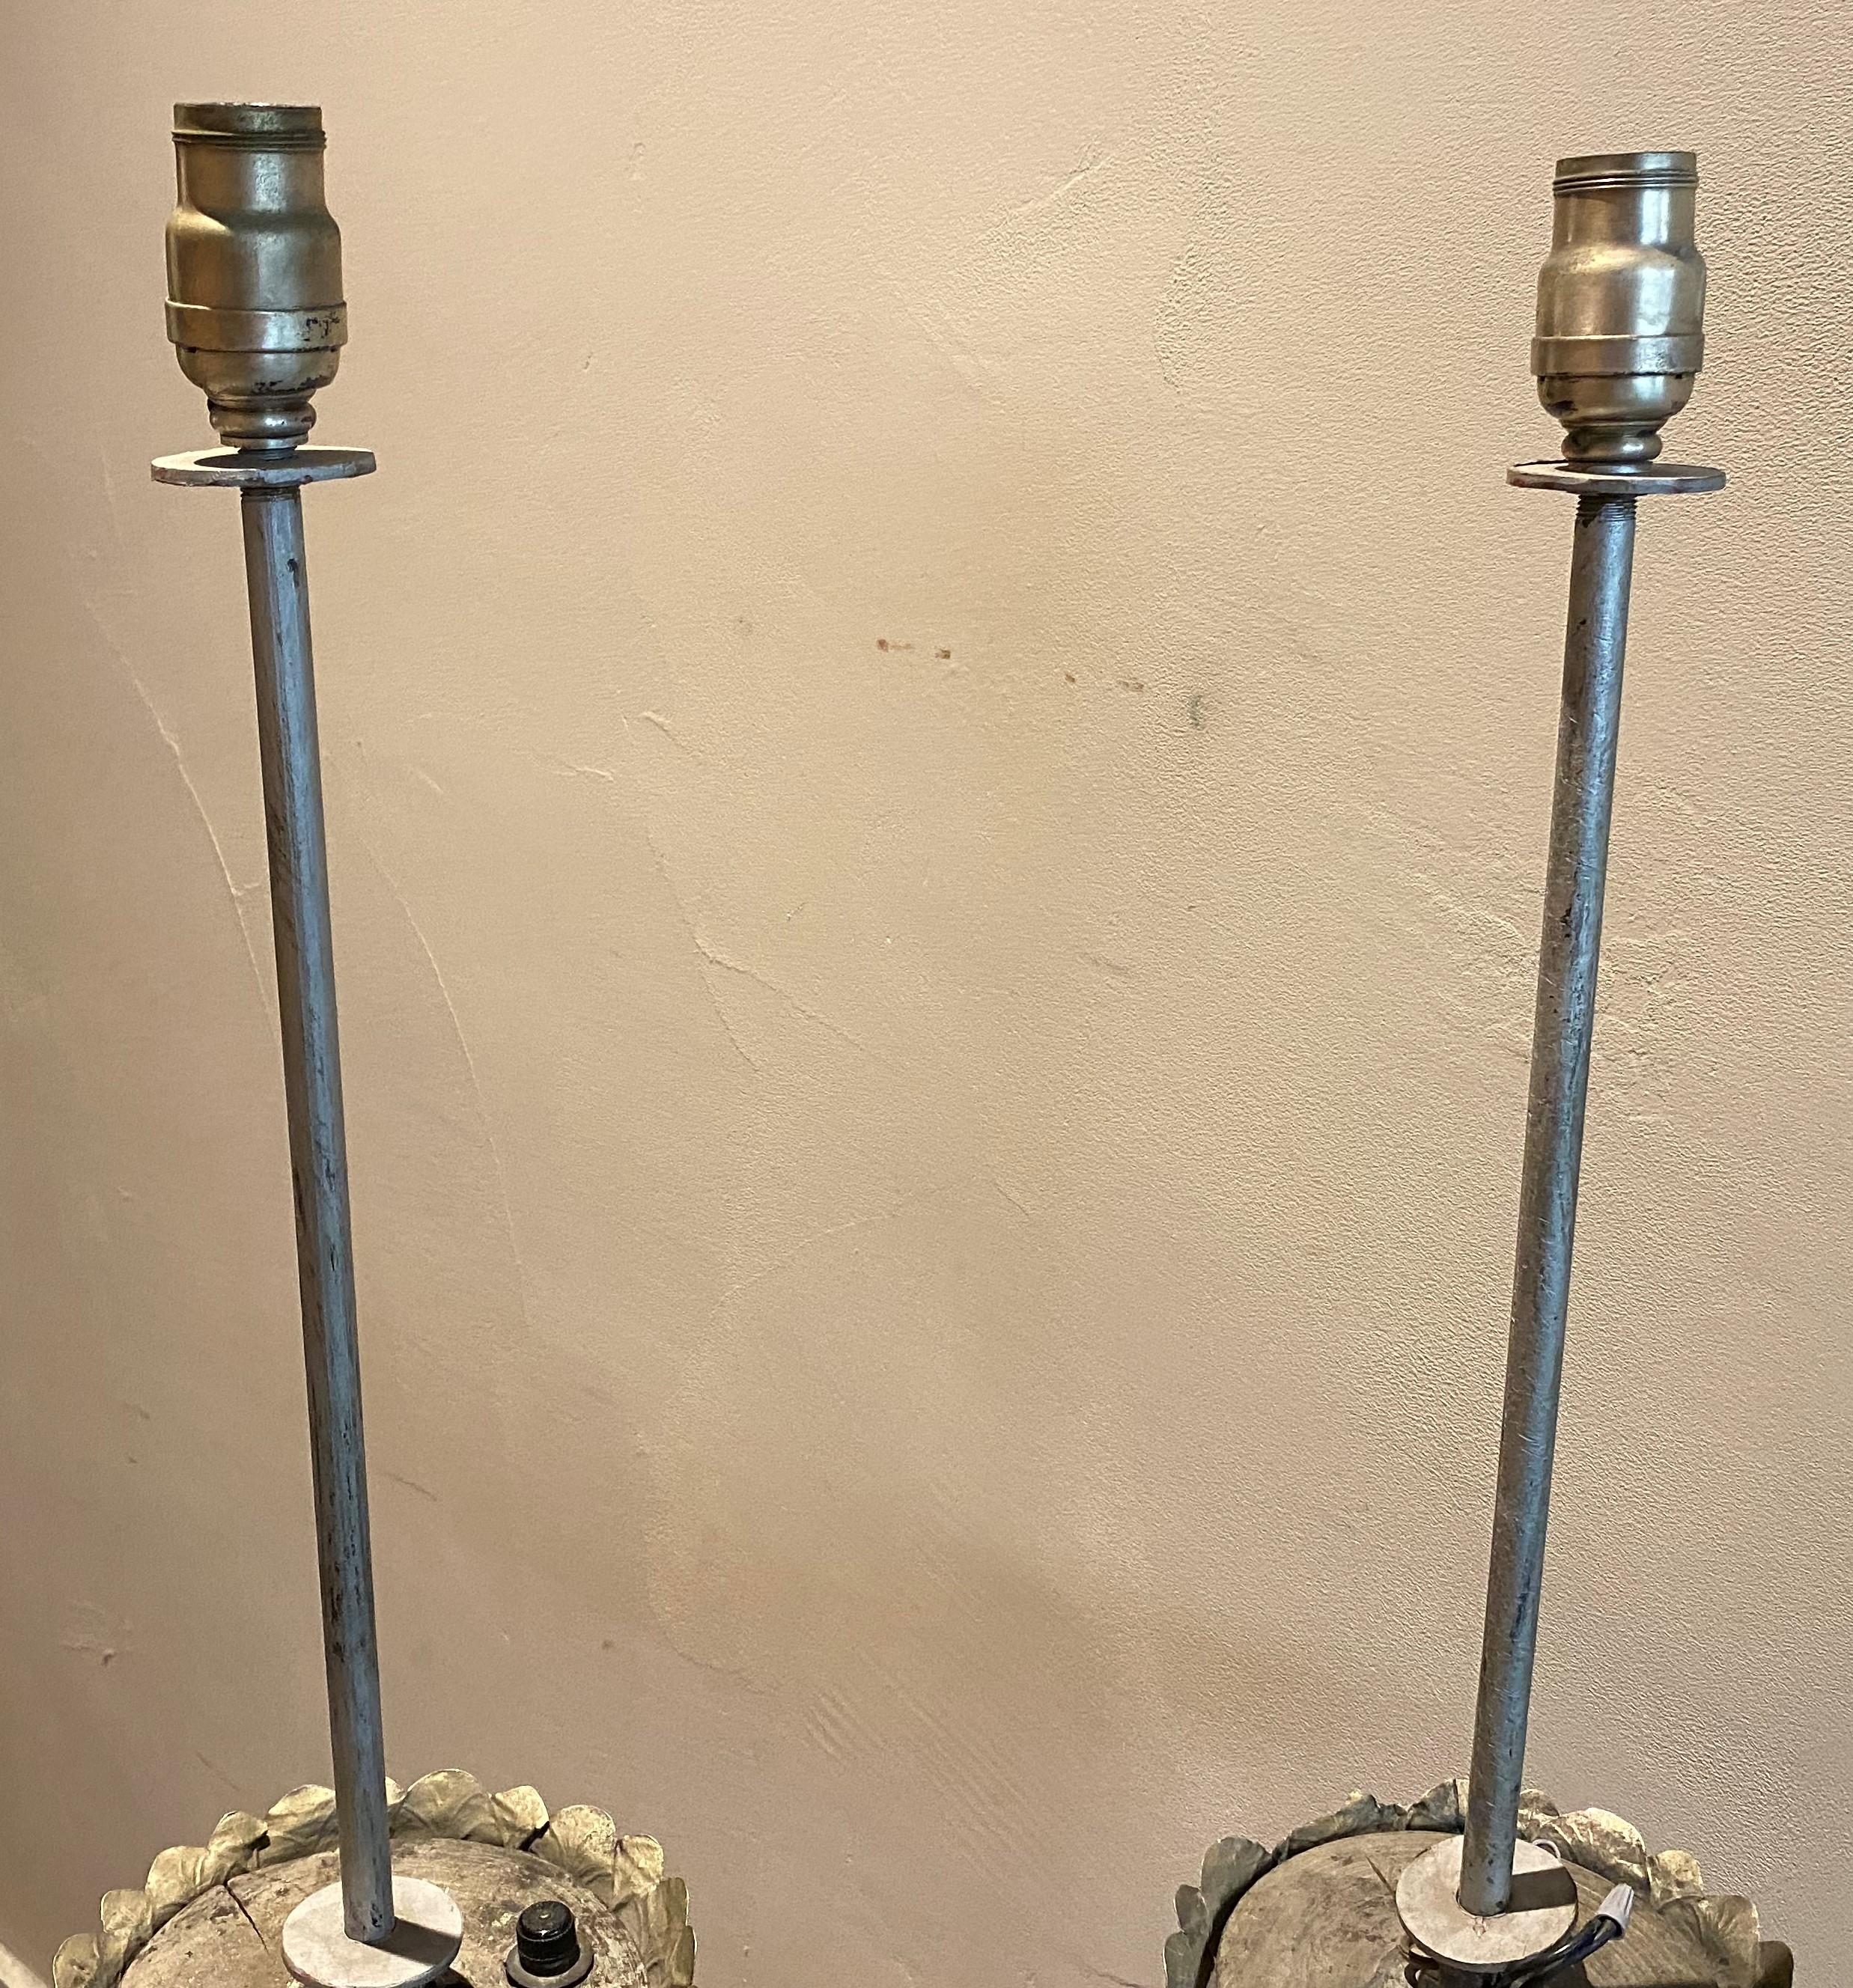 A fine pair of Italian silvered metal altar sticks with tripod bases, dating to the late 18th or early 19th century, electrified and modified into floor lamps.  Good overall condition, with some metal bends, splits, and other imperfections and wear